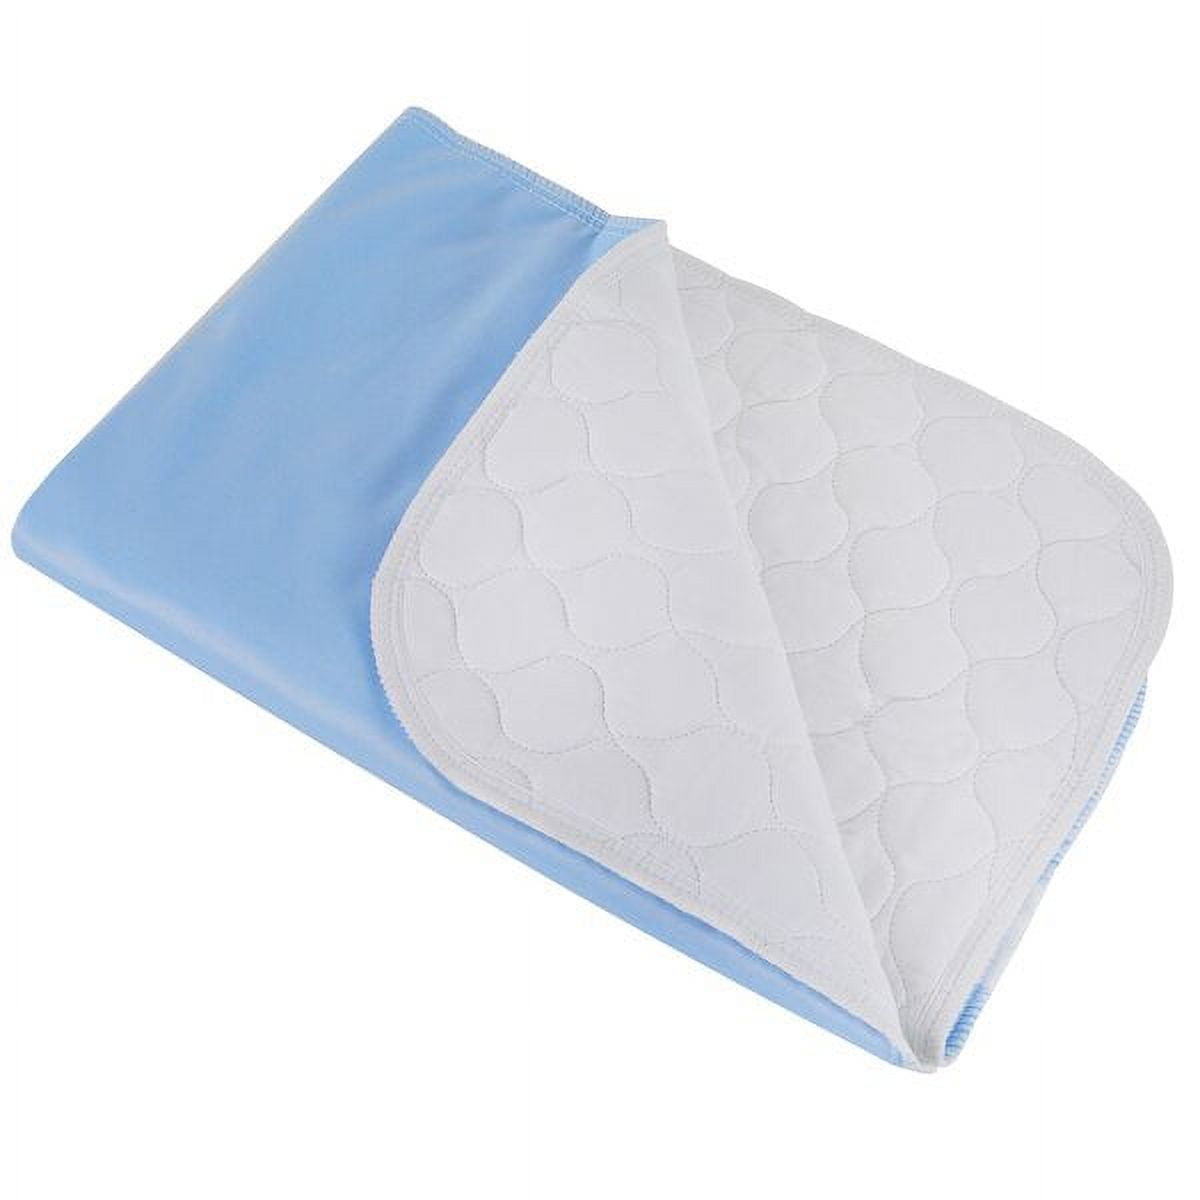 Premium Incontinence Washable Bed Pad - Heavy Duty Reusable Cotton Quilted  Underpad - 34X35 - 3 Pack 